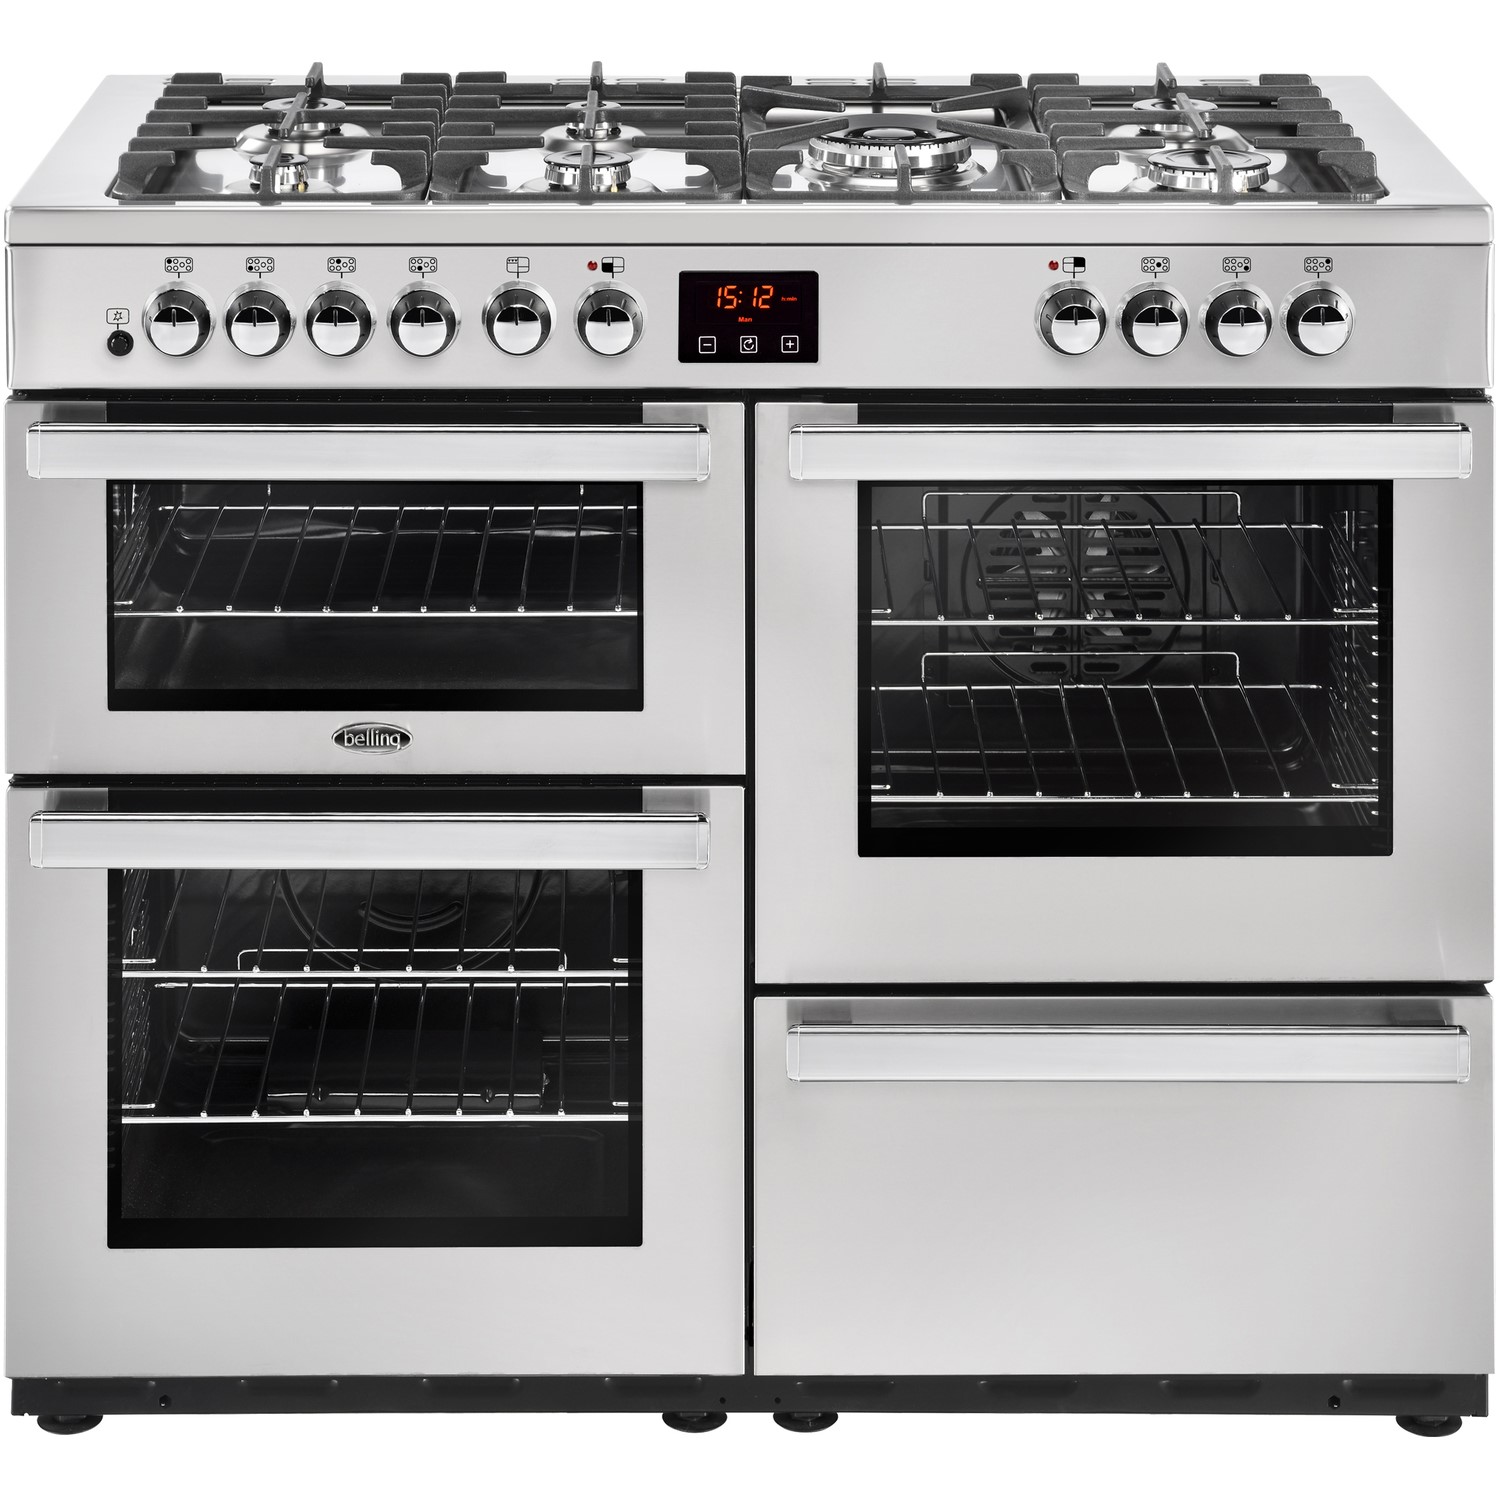 Refurbished Belling Cookcentre 110DF Professional 110cm Dual Fuel Range Cooker - Stainless Steel